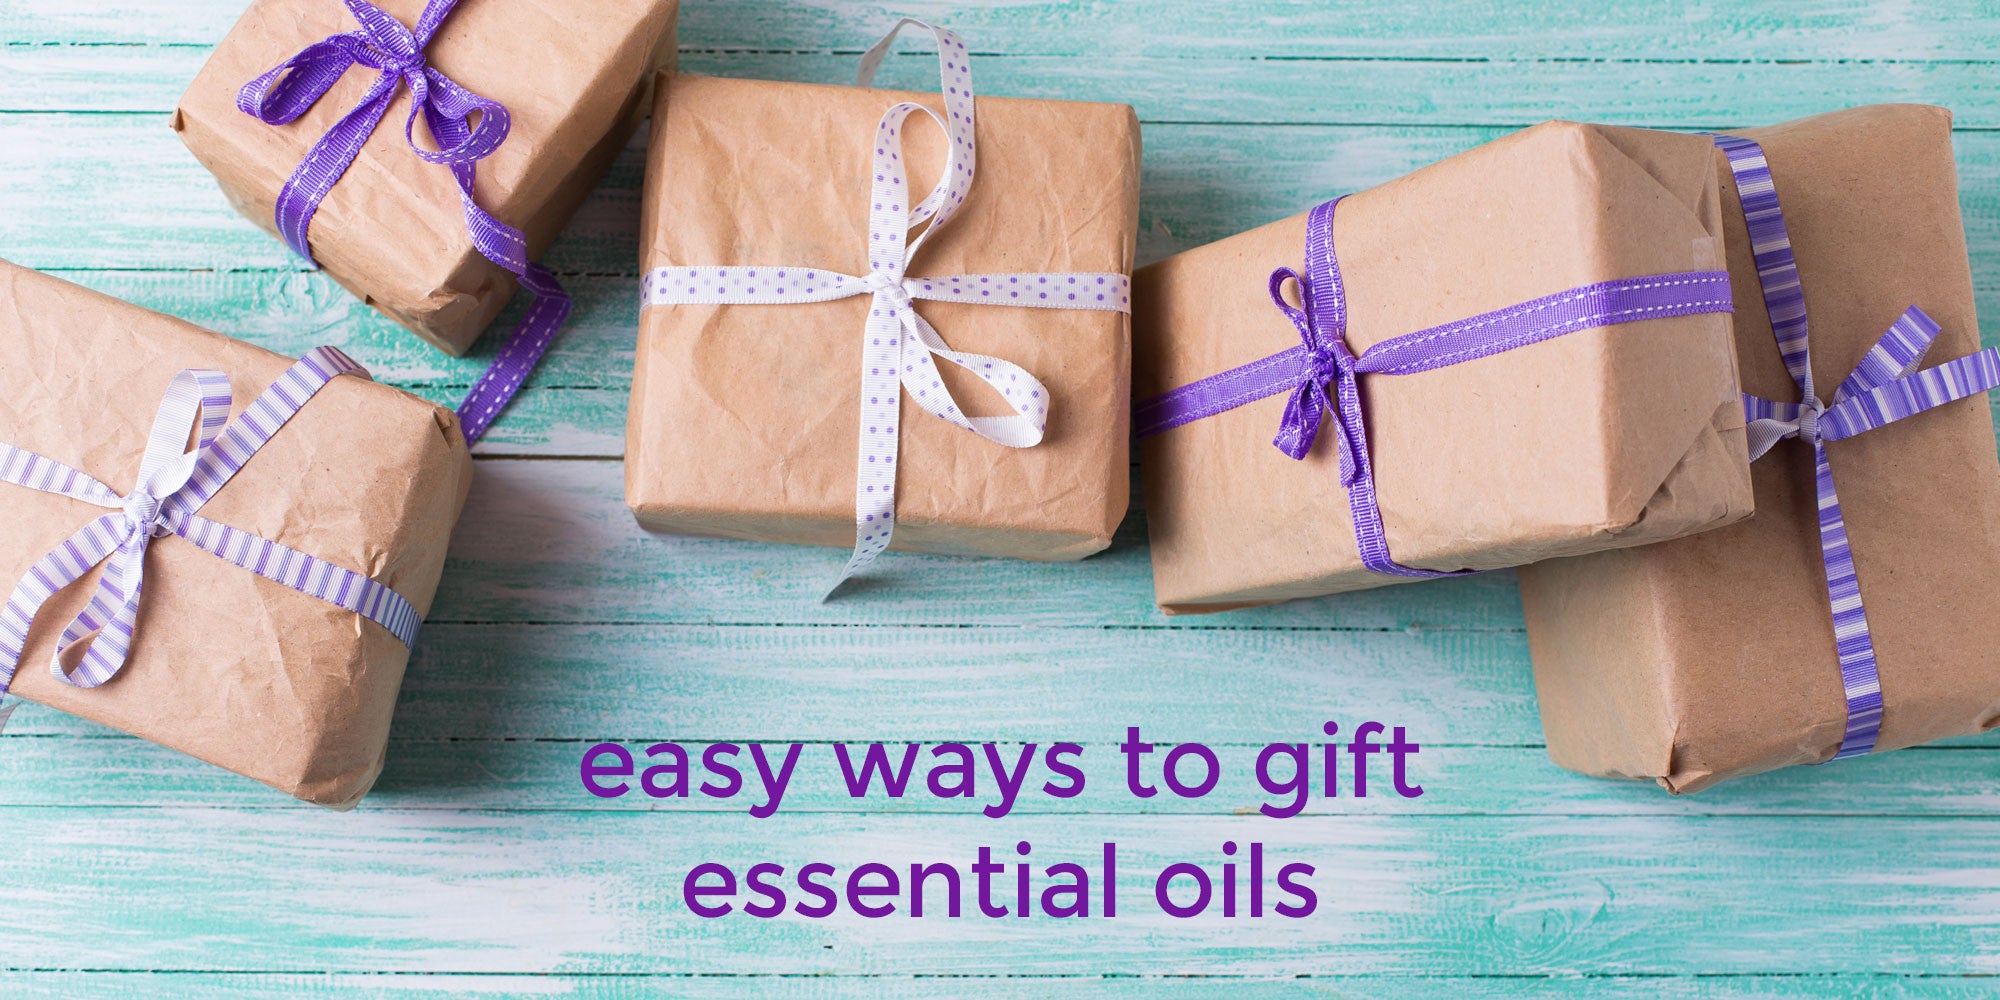 Easy Ways to Gift Essential Oils